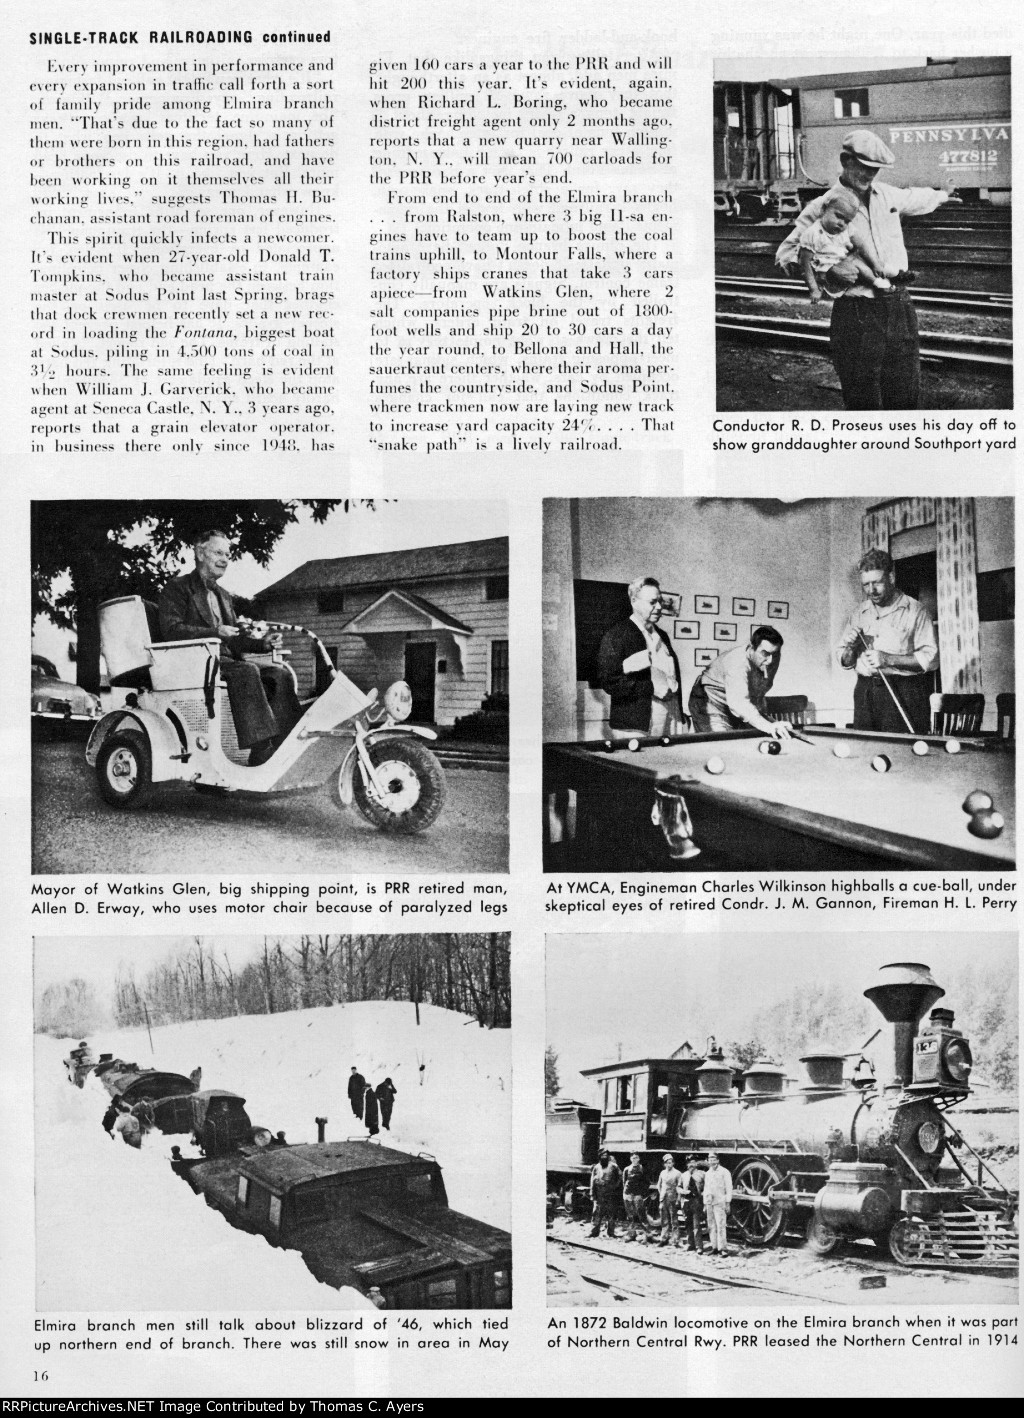 "On The Elmira Branch," Page 16, 1953